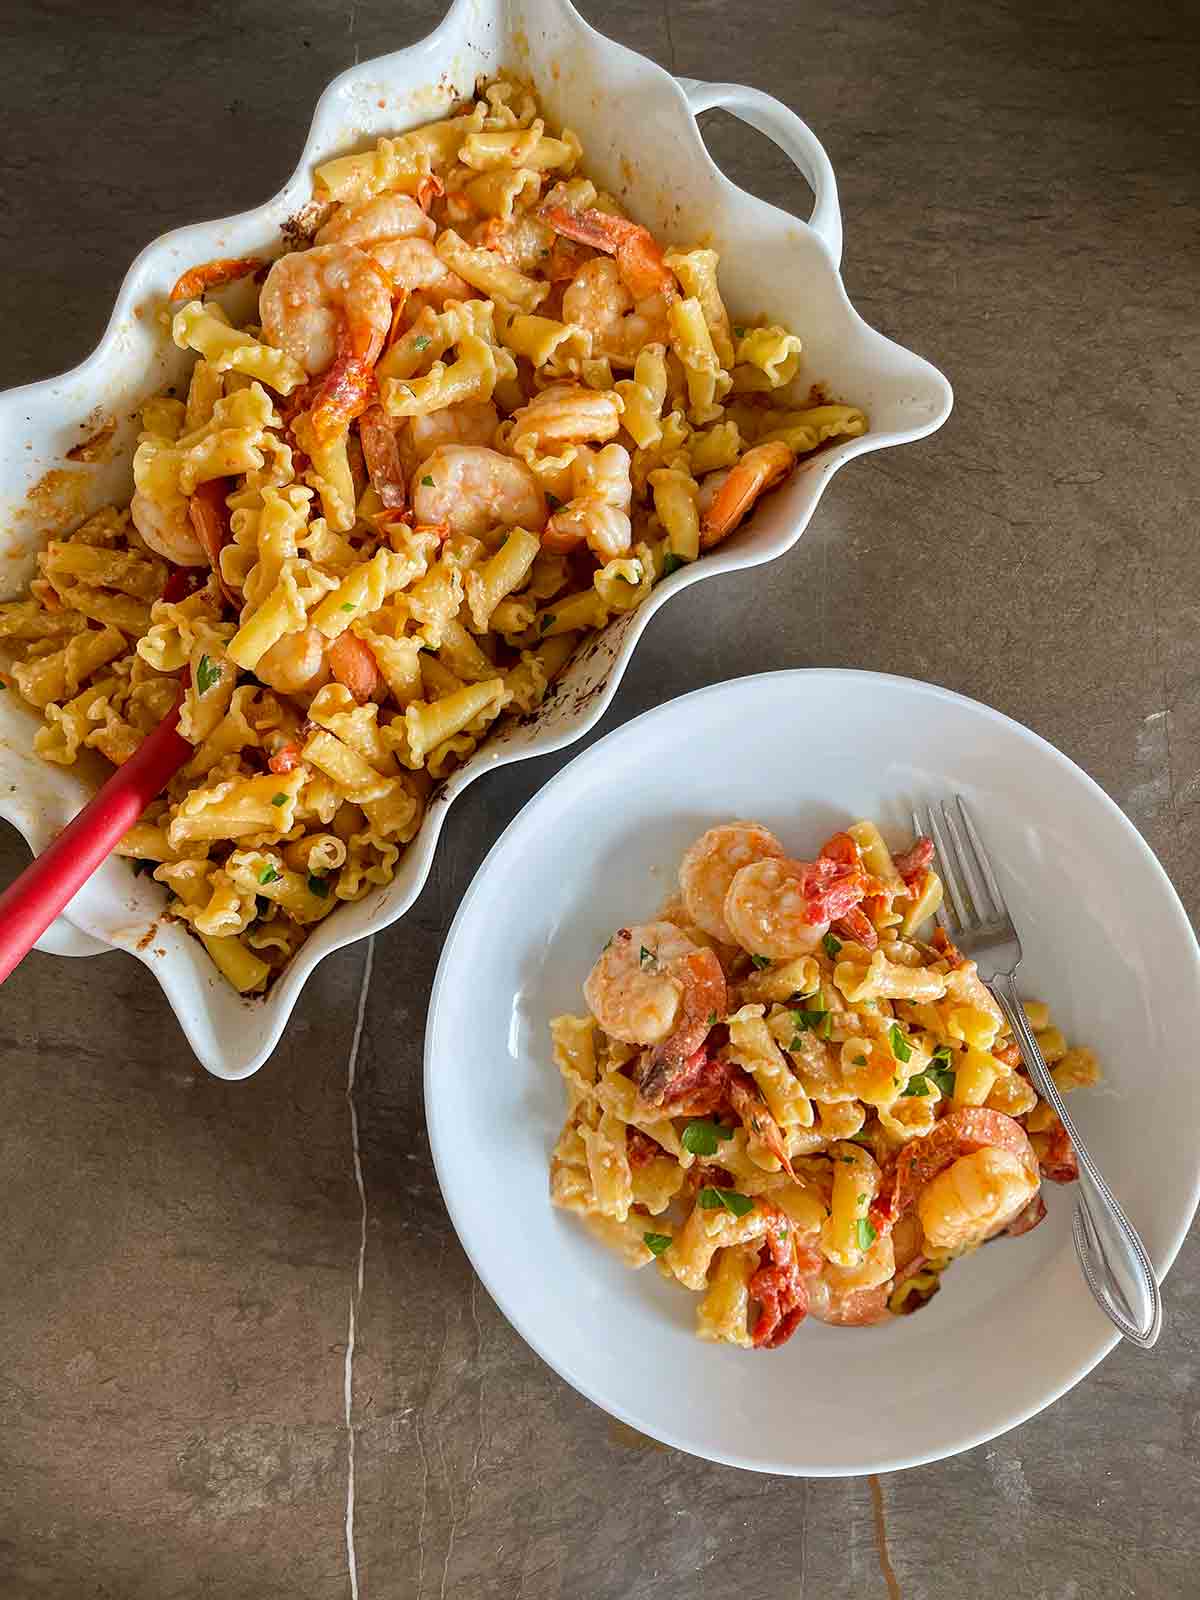 A serving dish and bowl both filled with baked pasta with shrimp, feta, and tomatoes, with a fork on the side.